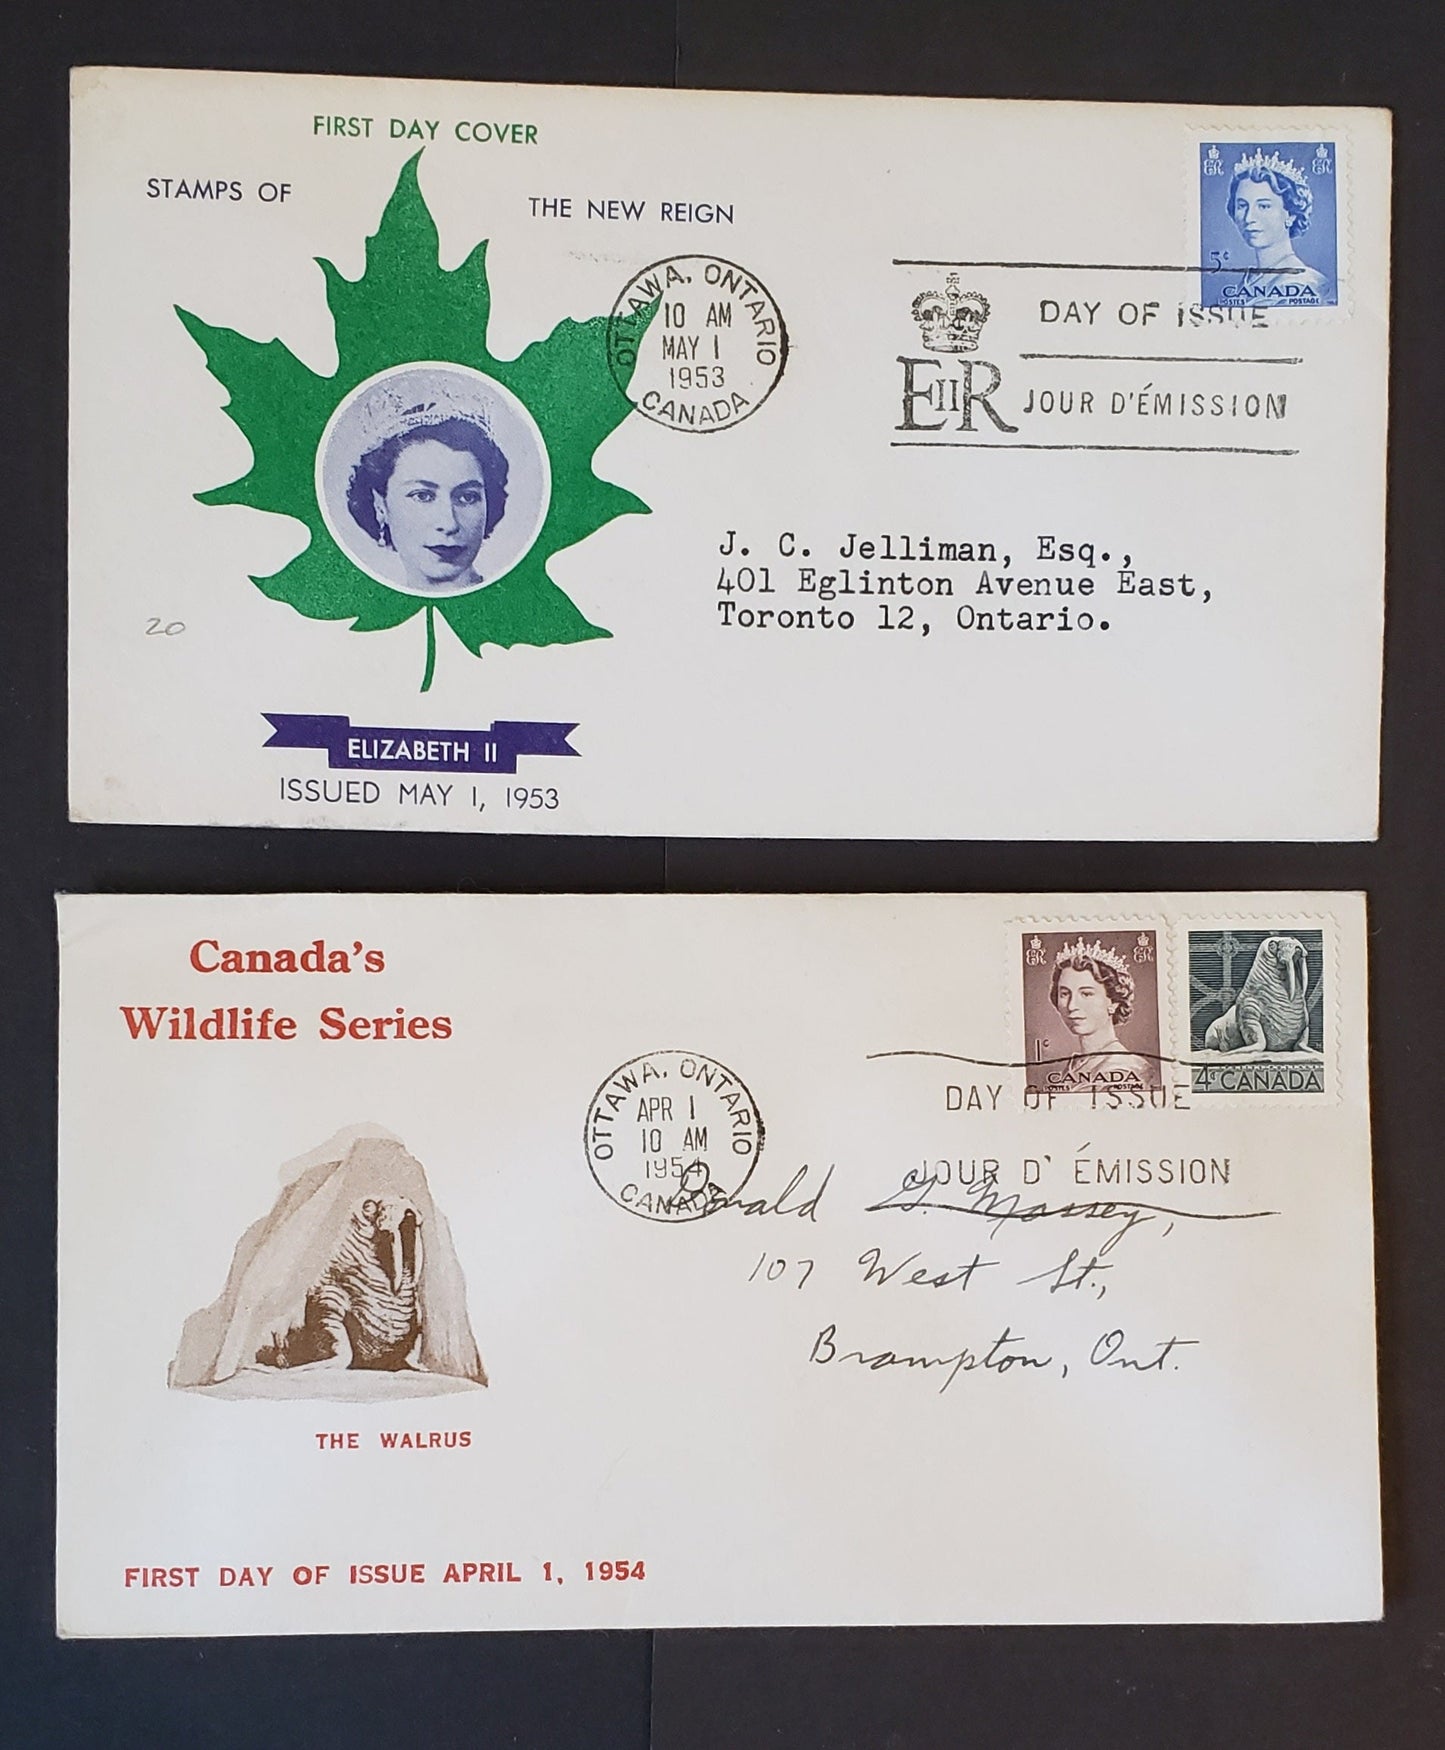 Lot 6 Canada #325, 329, 335 1c/5c Violet Brown/Ultramarine Queen Elizabeth II & Walrus 1953-1954 Karsh & Wildlife Issues, 2 Personal A & Personal E Cachets FDC's Franked With Singles, Both Addressed, Cat. Value $11